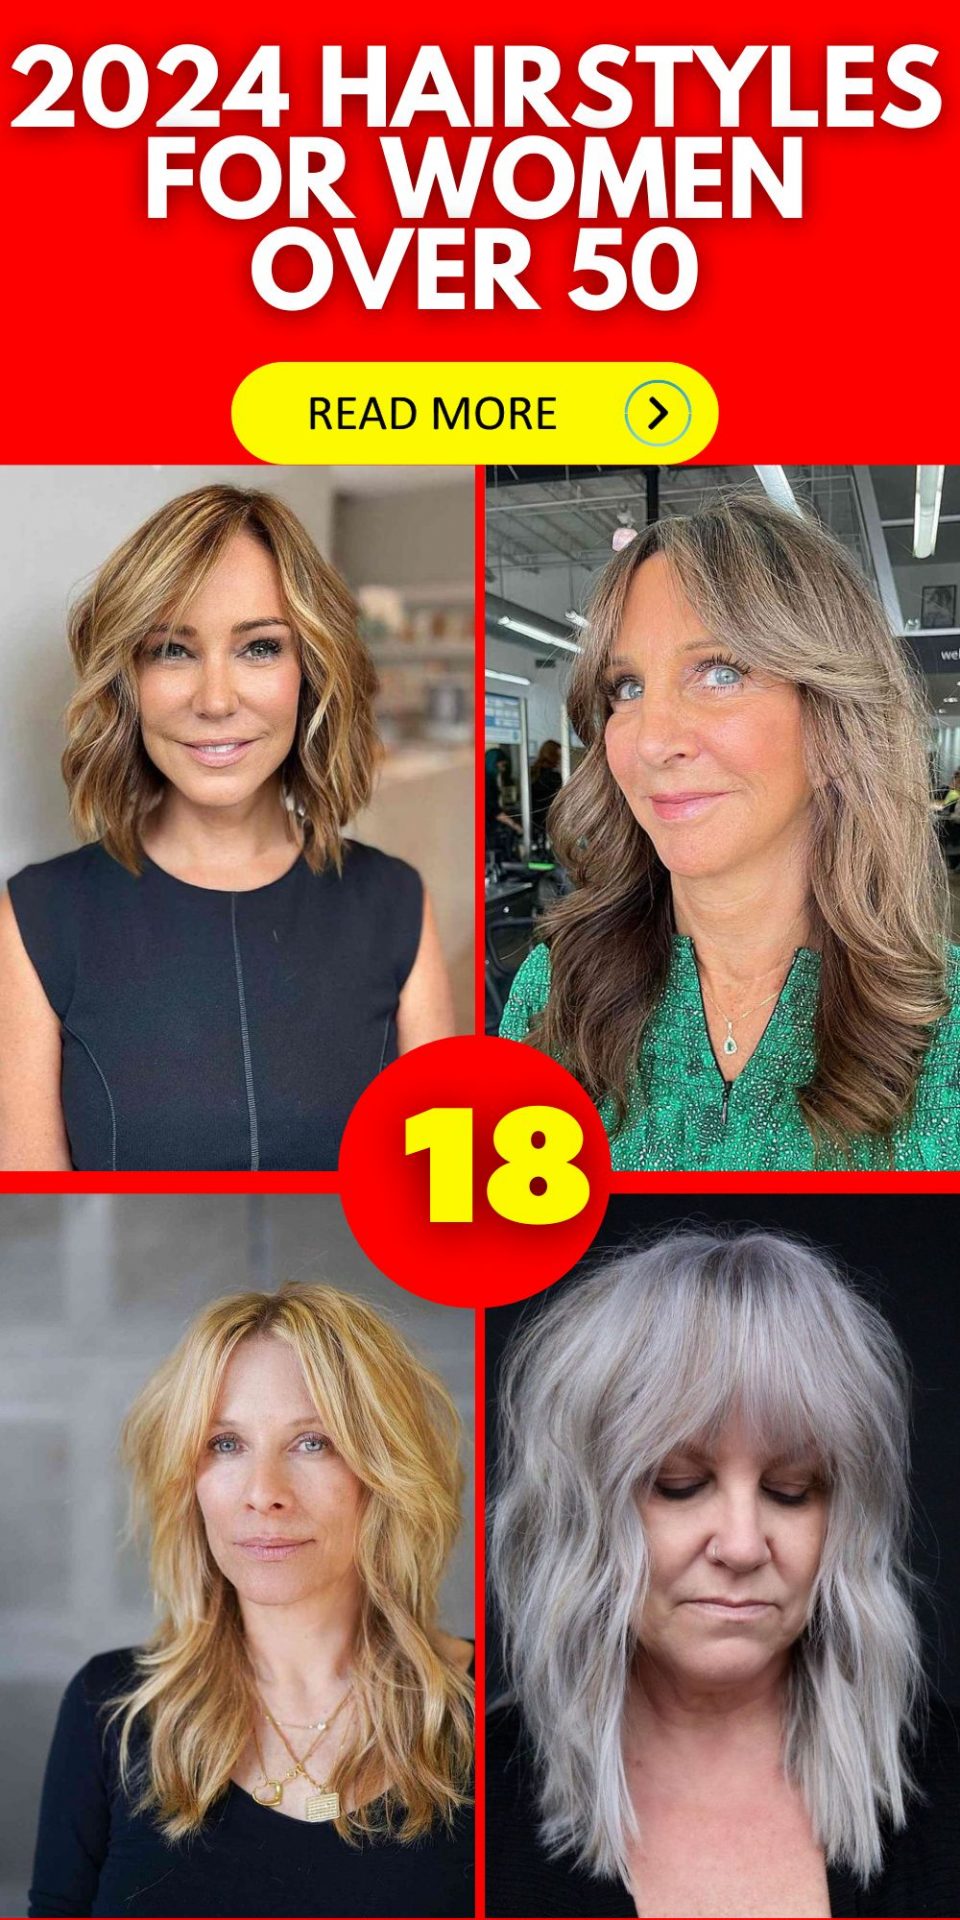 Chic 2024 Haircuts for Women Over 50 Short, Bob, Stacked Bob, and More!